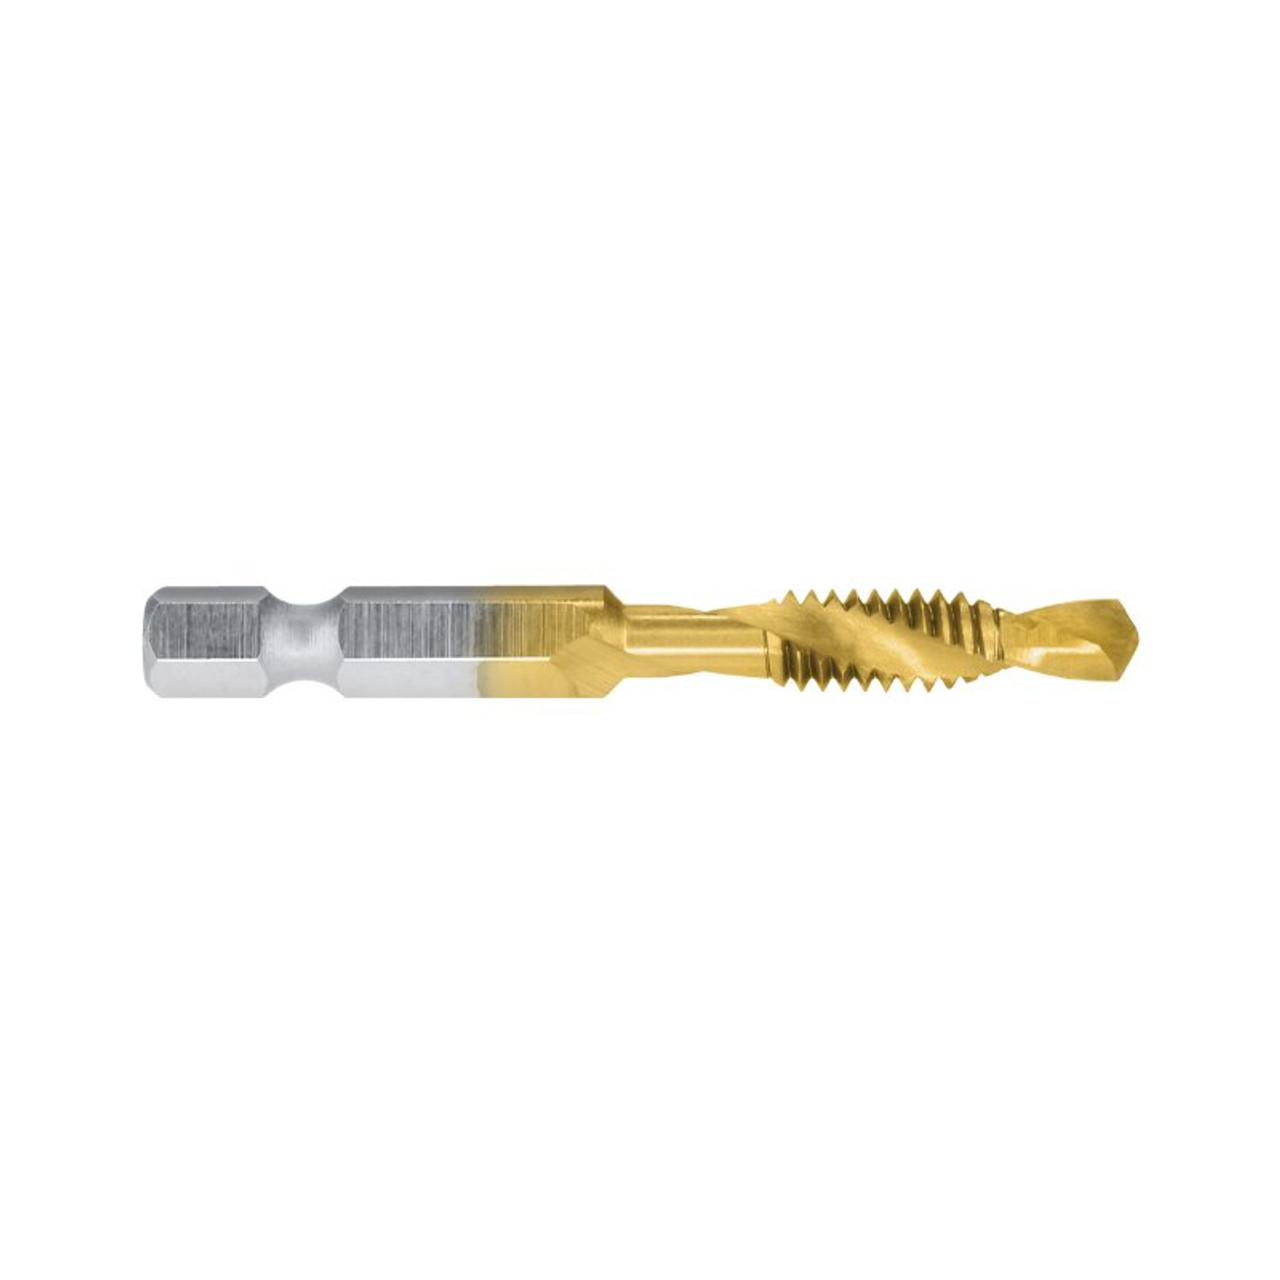 Unc 1/4 X 20 Hss Combination Drill & Tap | Tin Coated